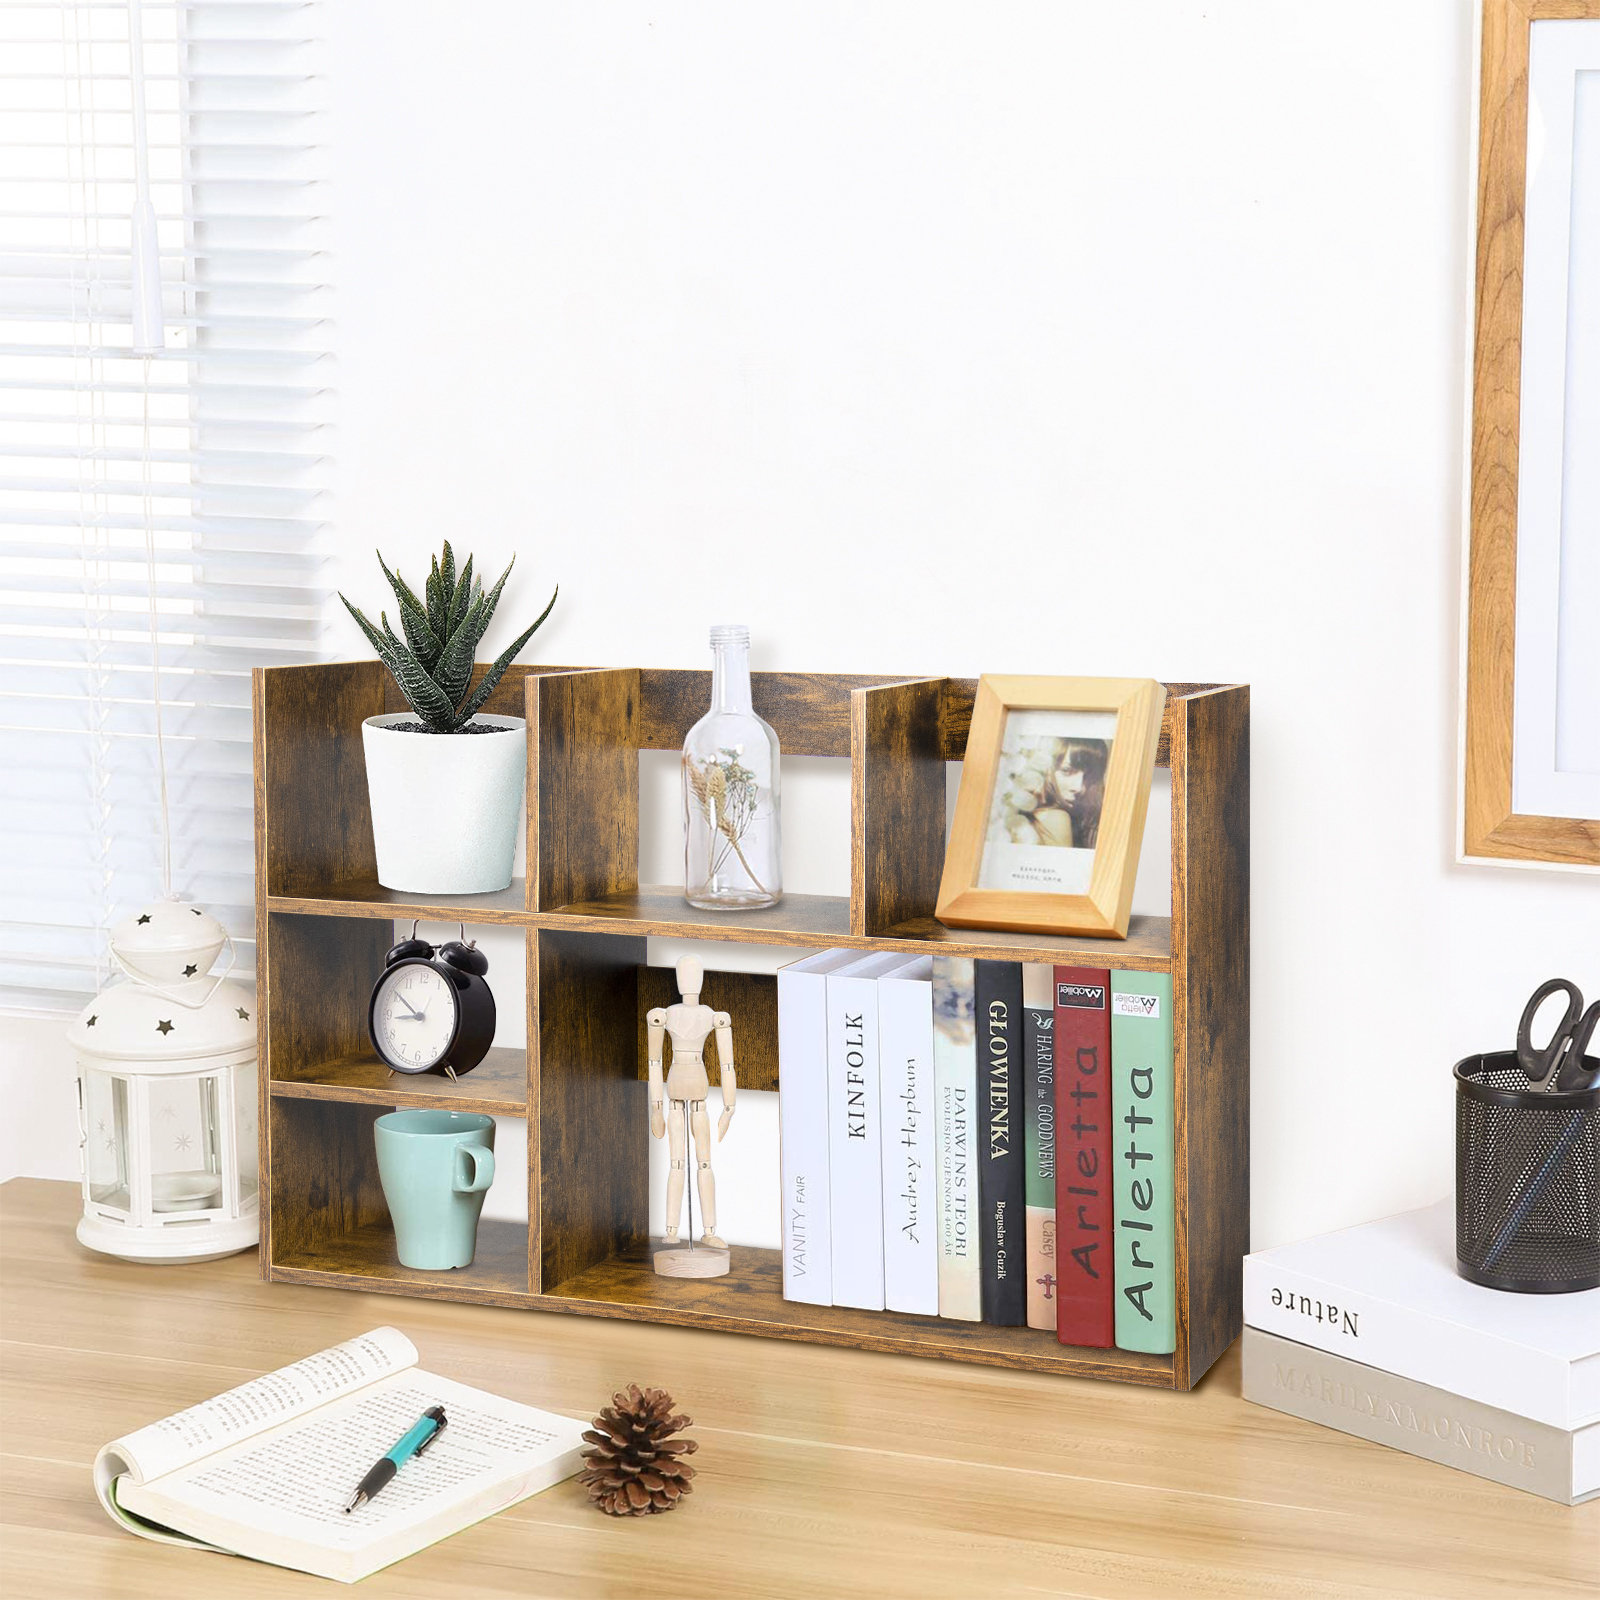 Jerry & Maggie Extra Large Desk Organizer Shelves for Office